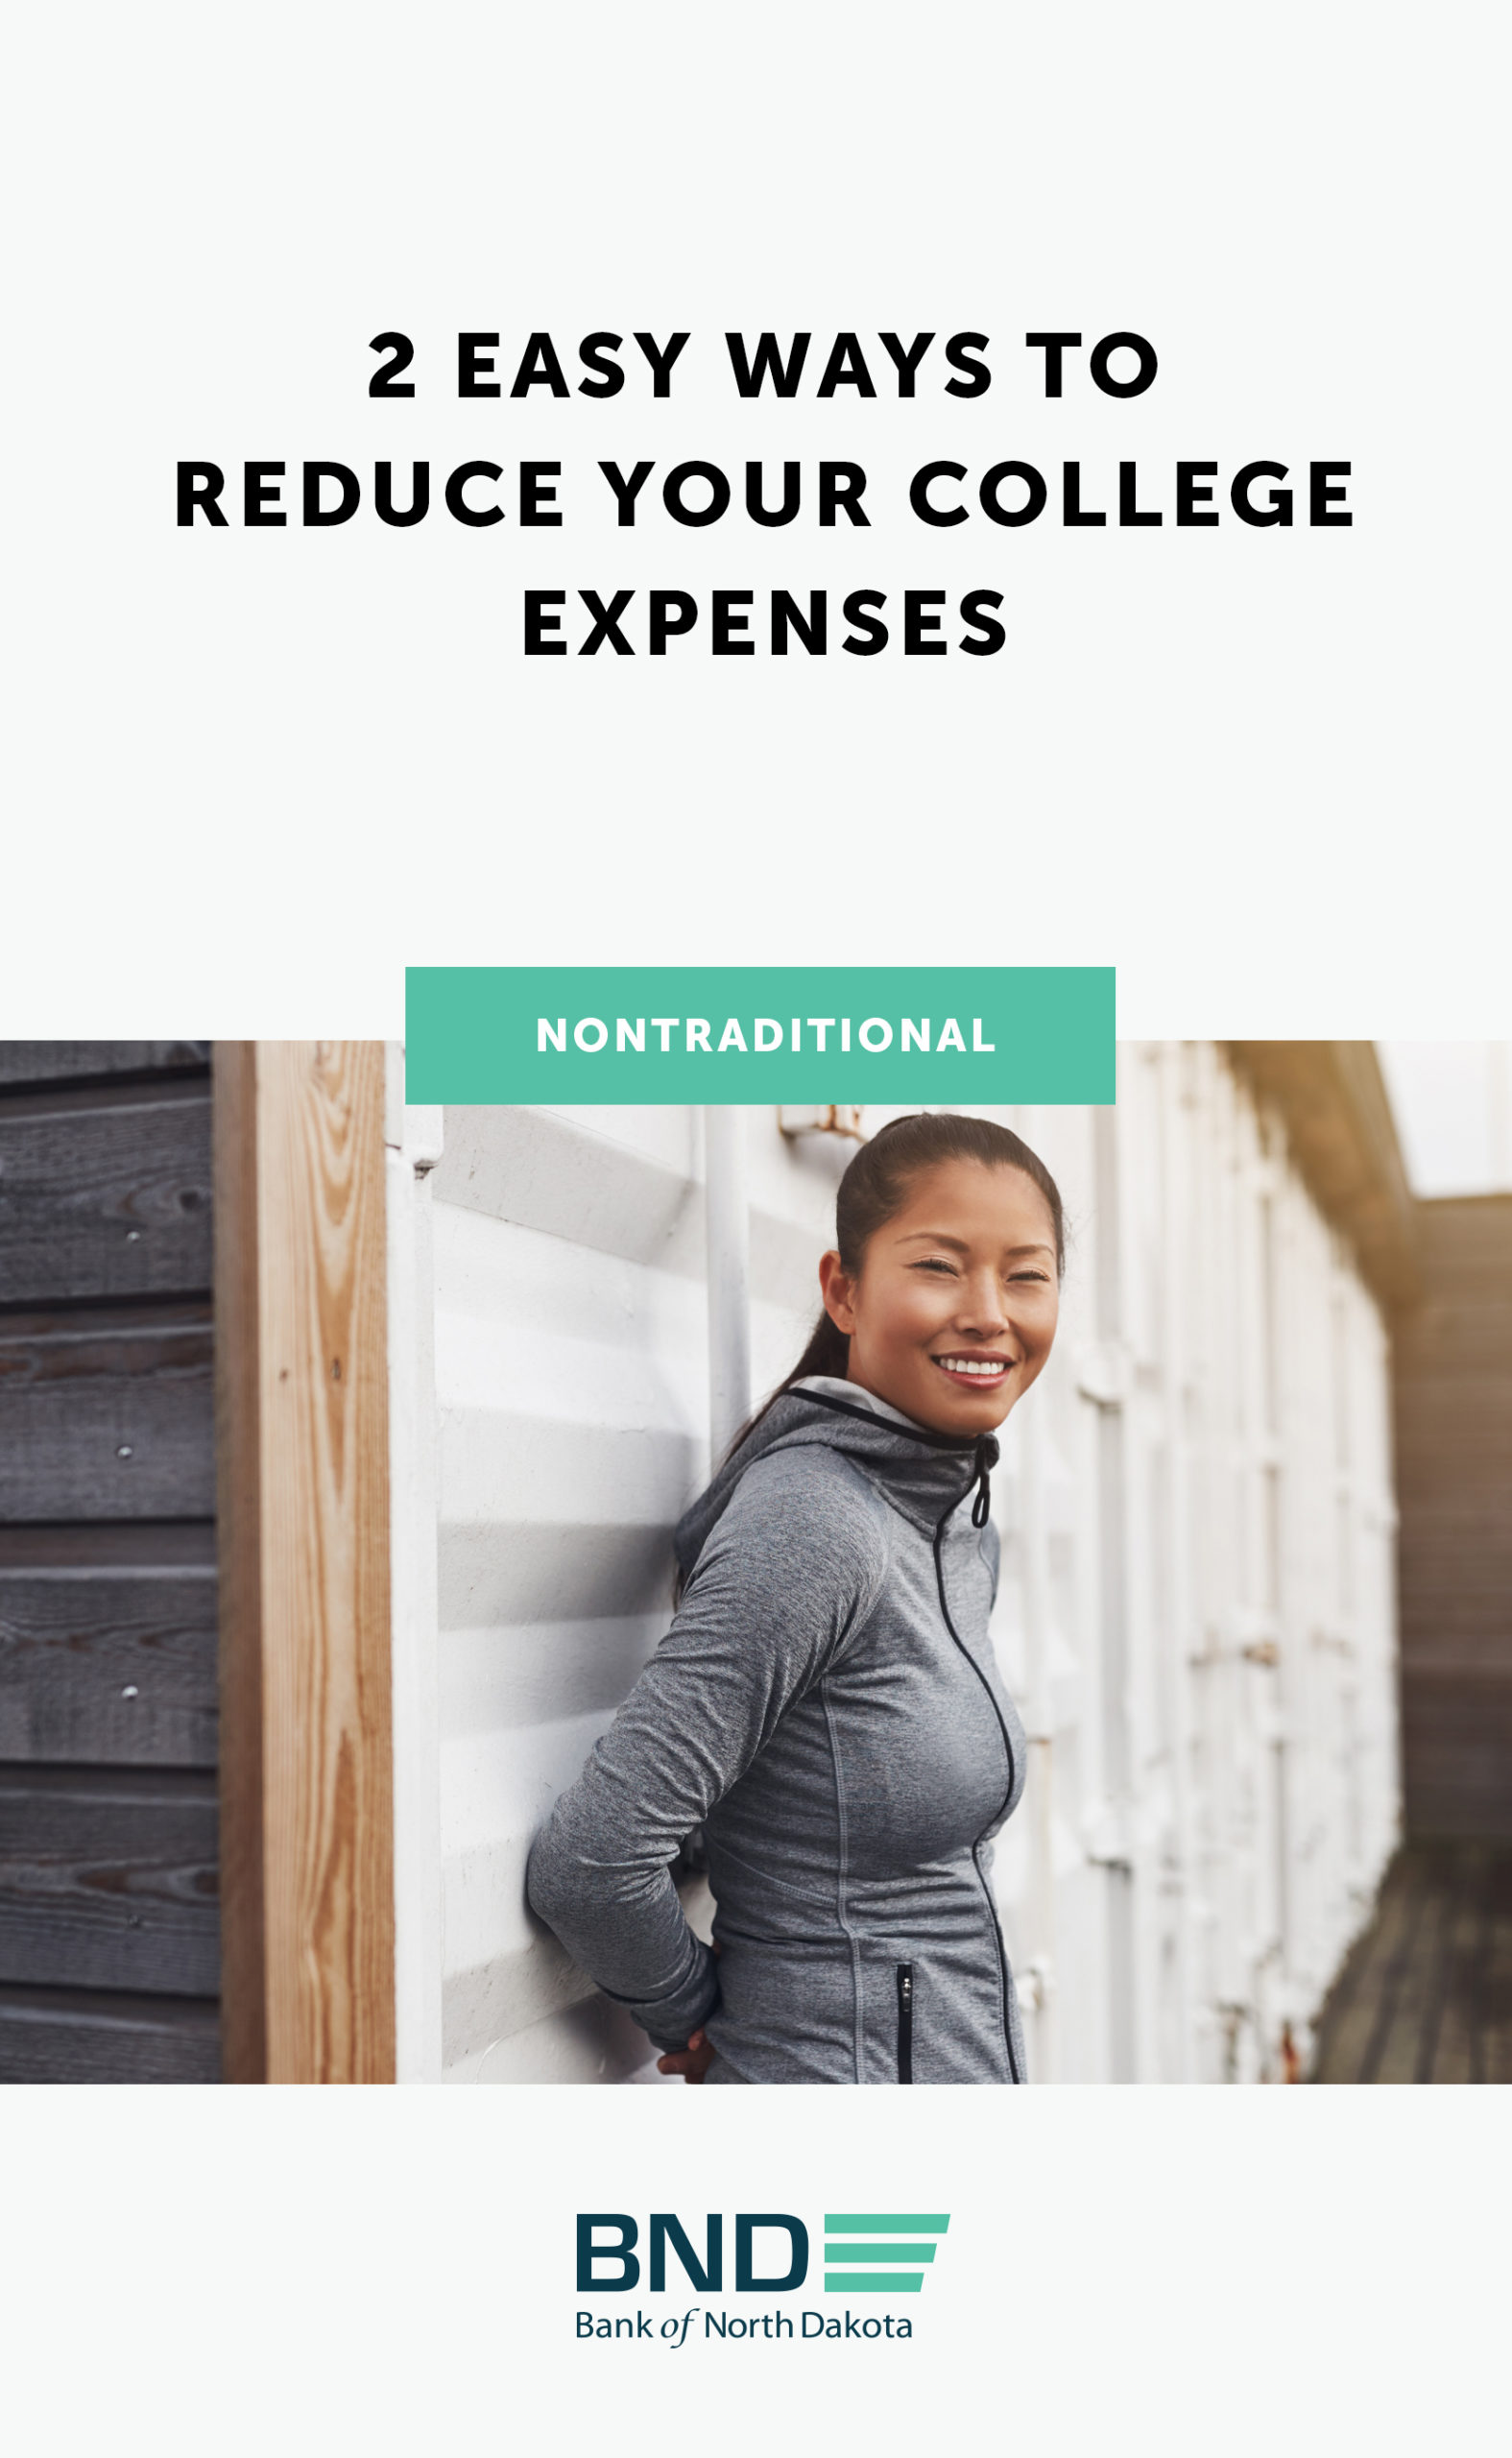 2 Easy Ways to Reduce Your College Expenses